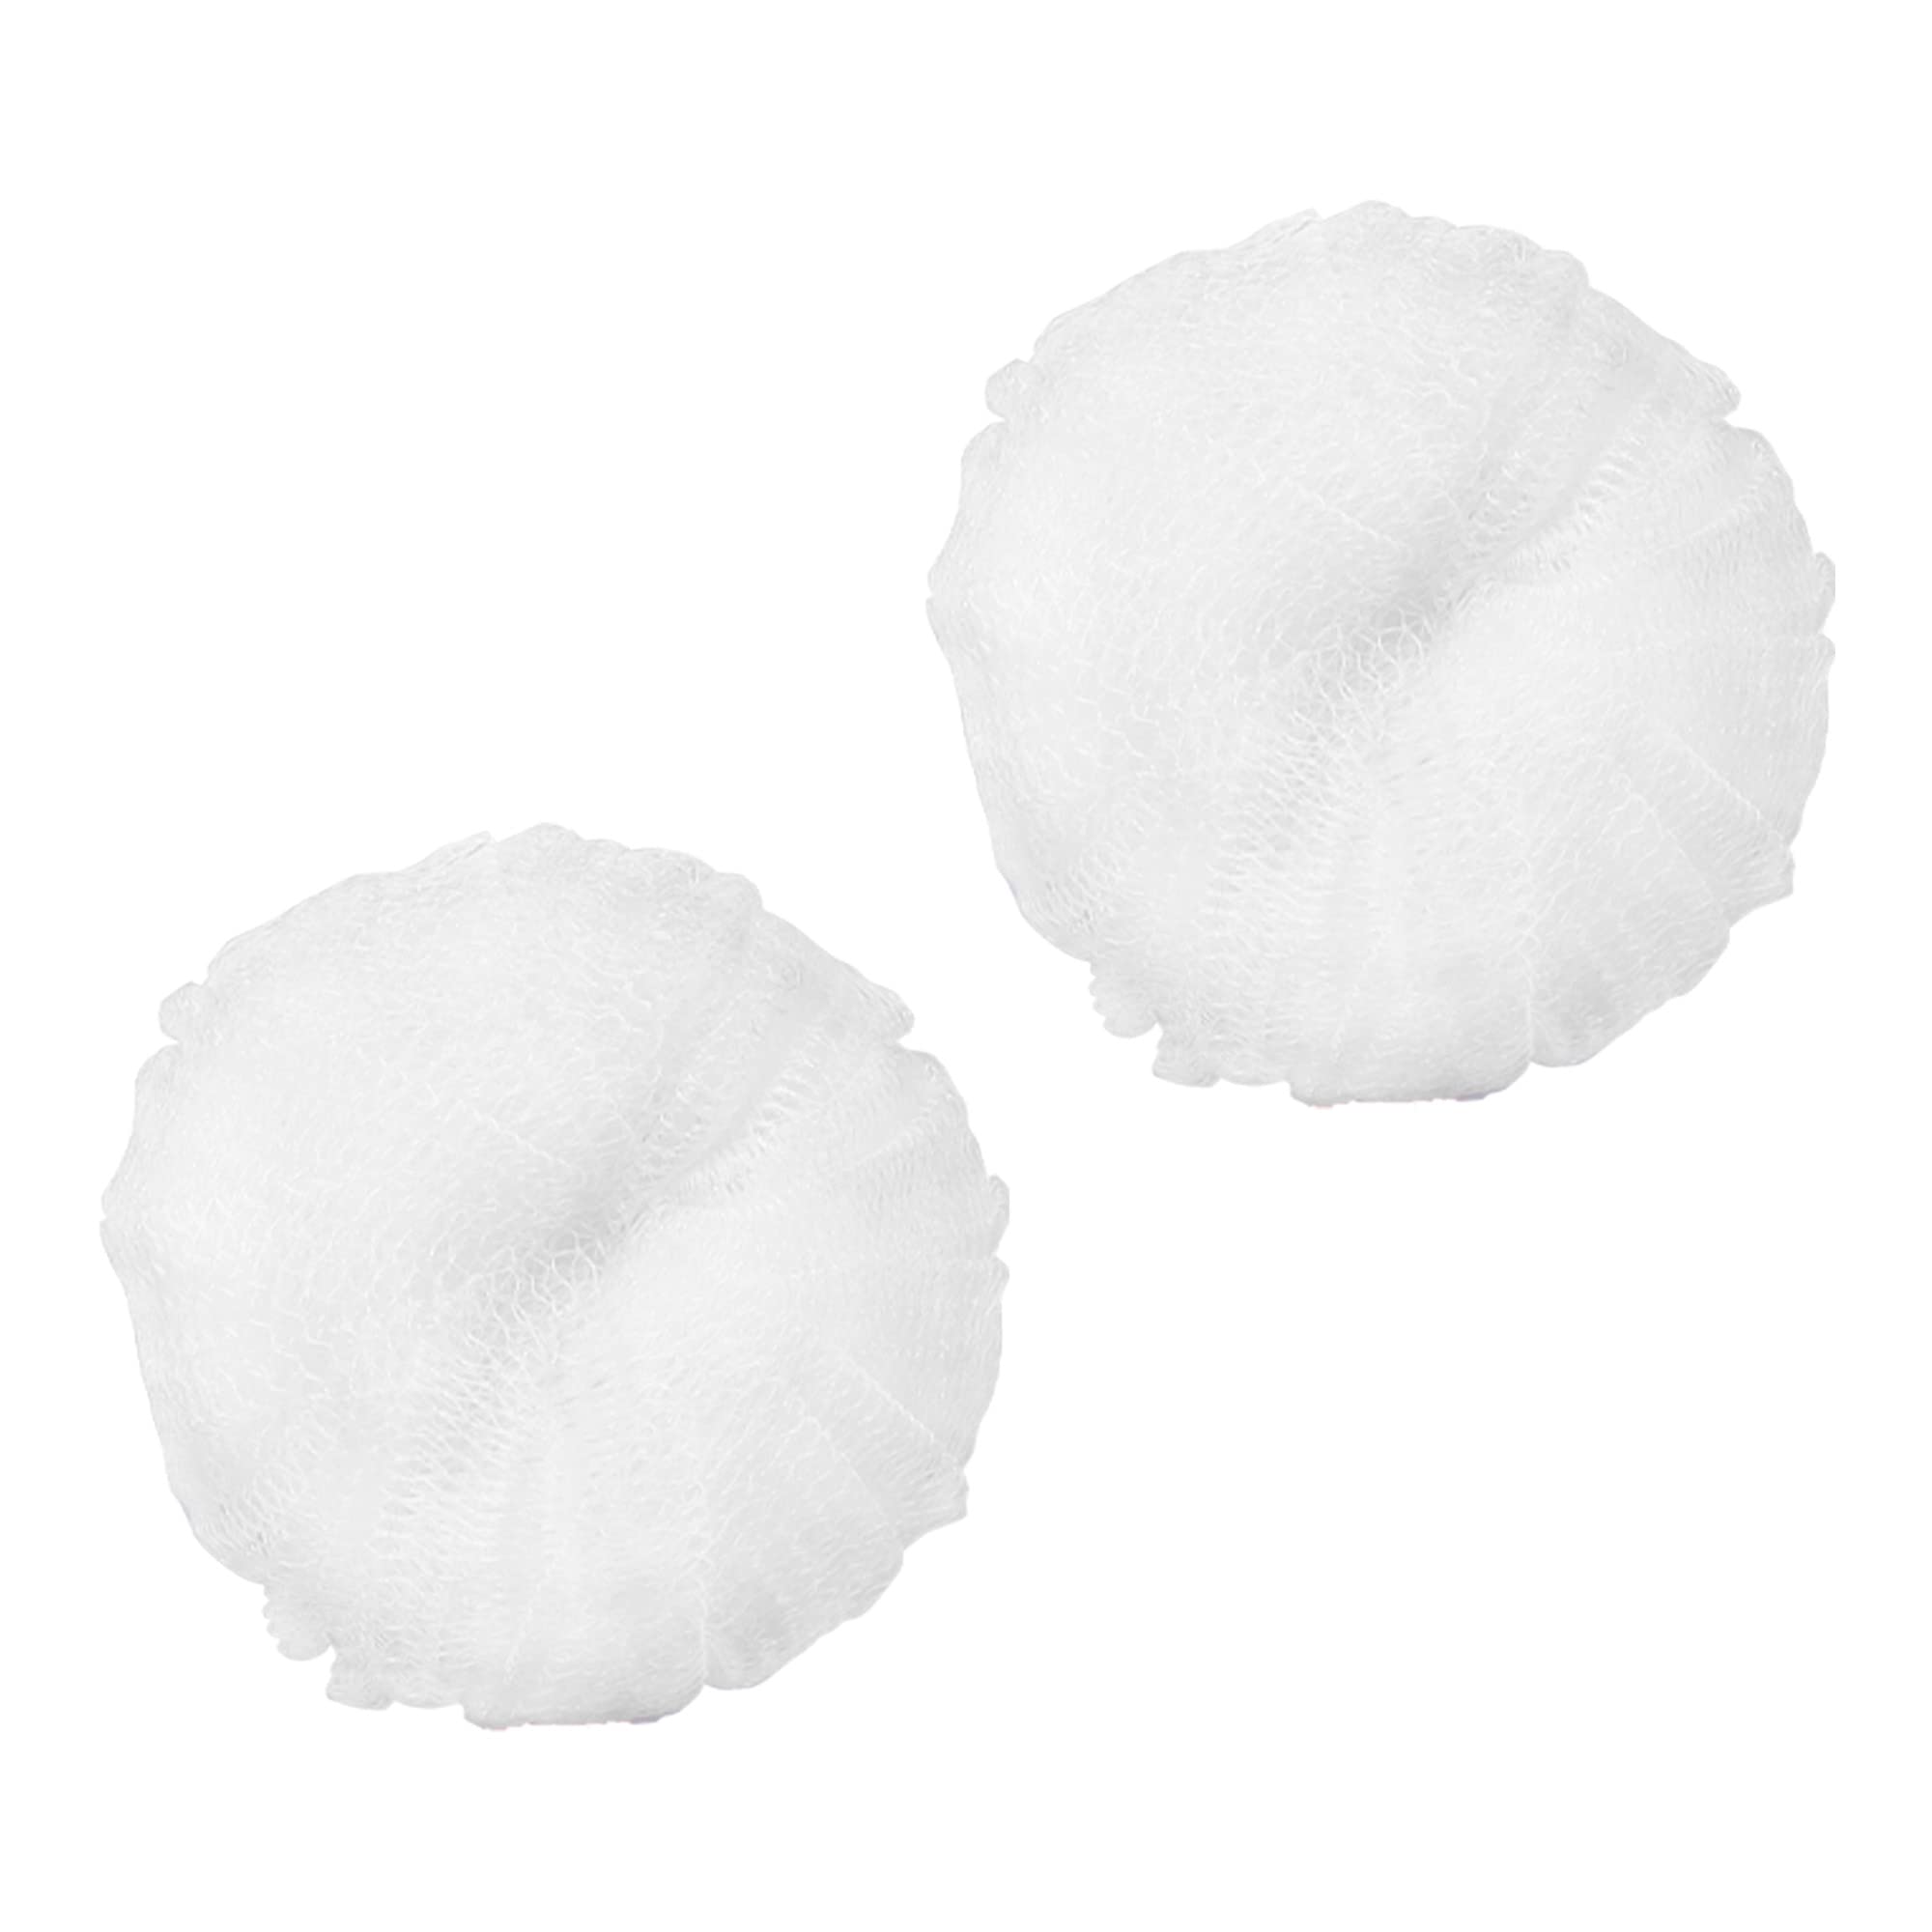 PMD silverscrub Silver-Infused Loofah Replacements, 2 ct.